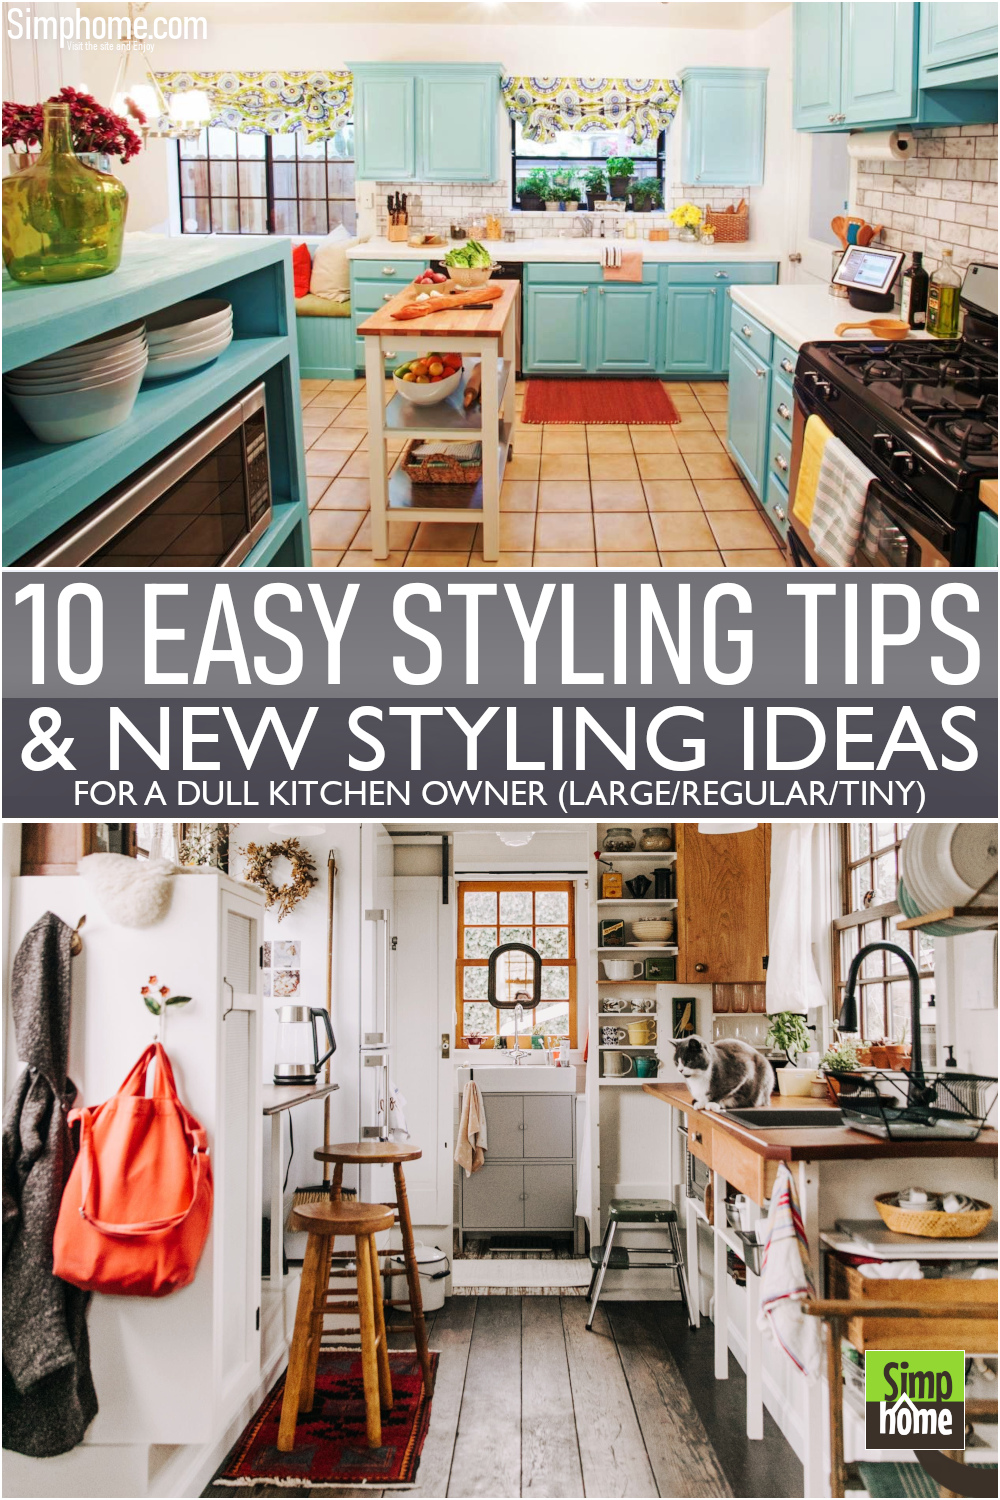 This is 10 Easy Styling Ideas for a Dull Kitchen Poster